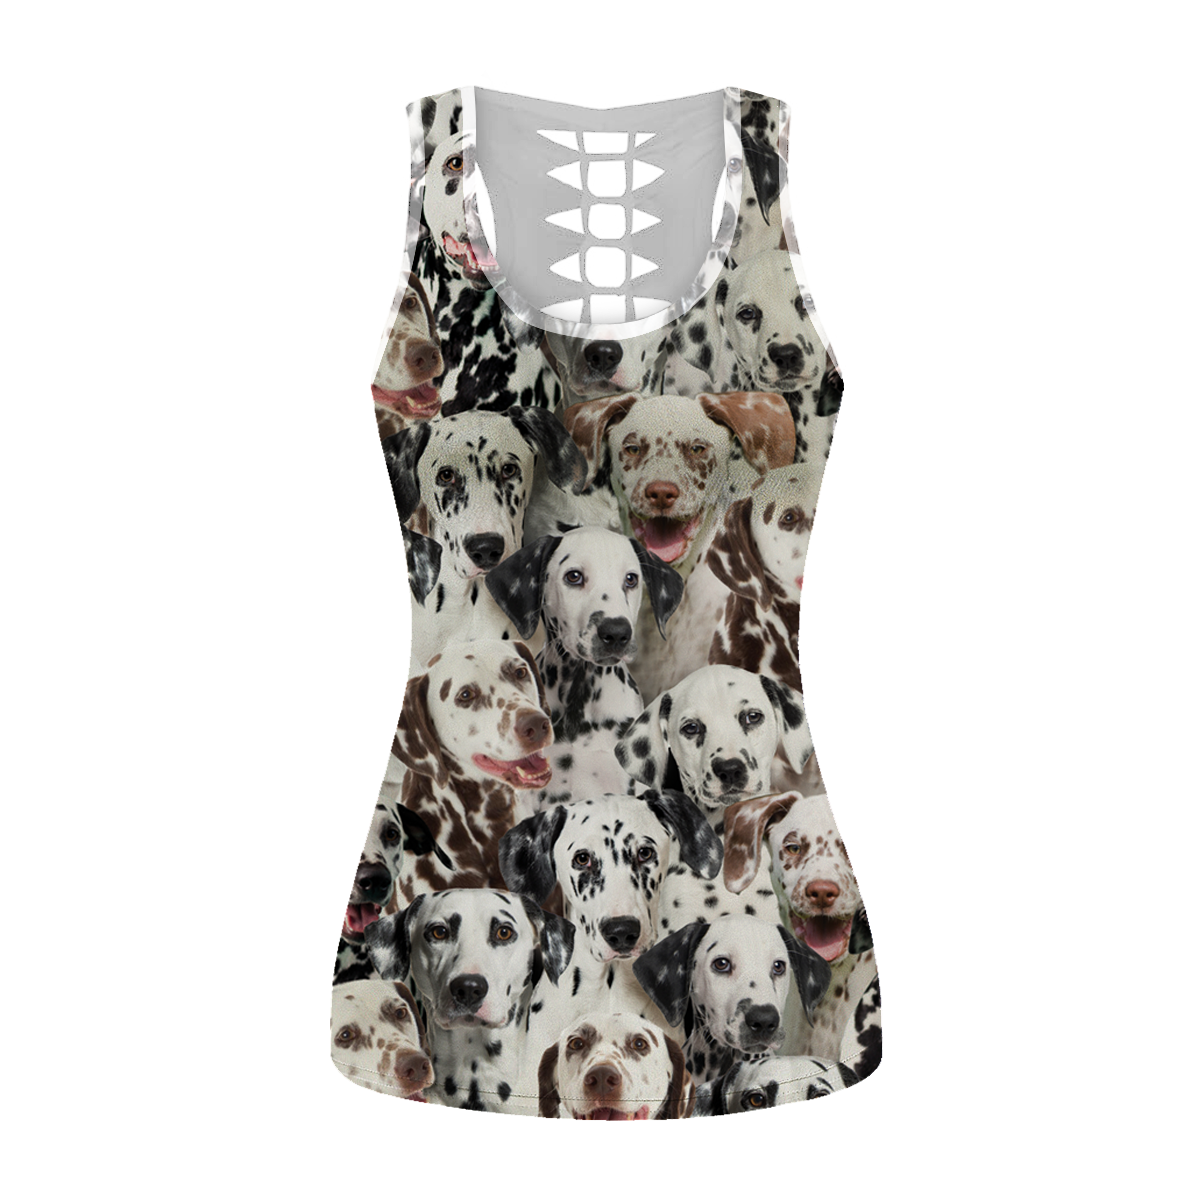 You Will Have A Bunch Of Dalmatians - Hollow Tank Top V1